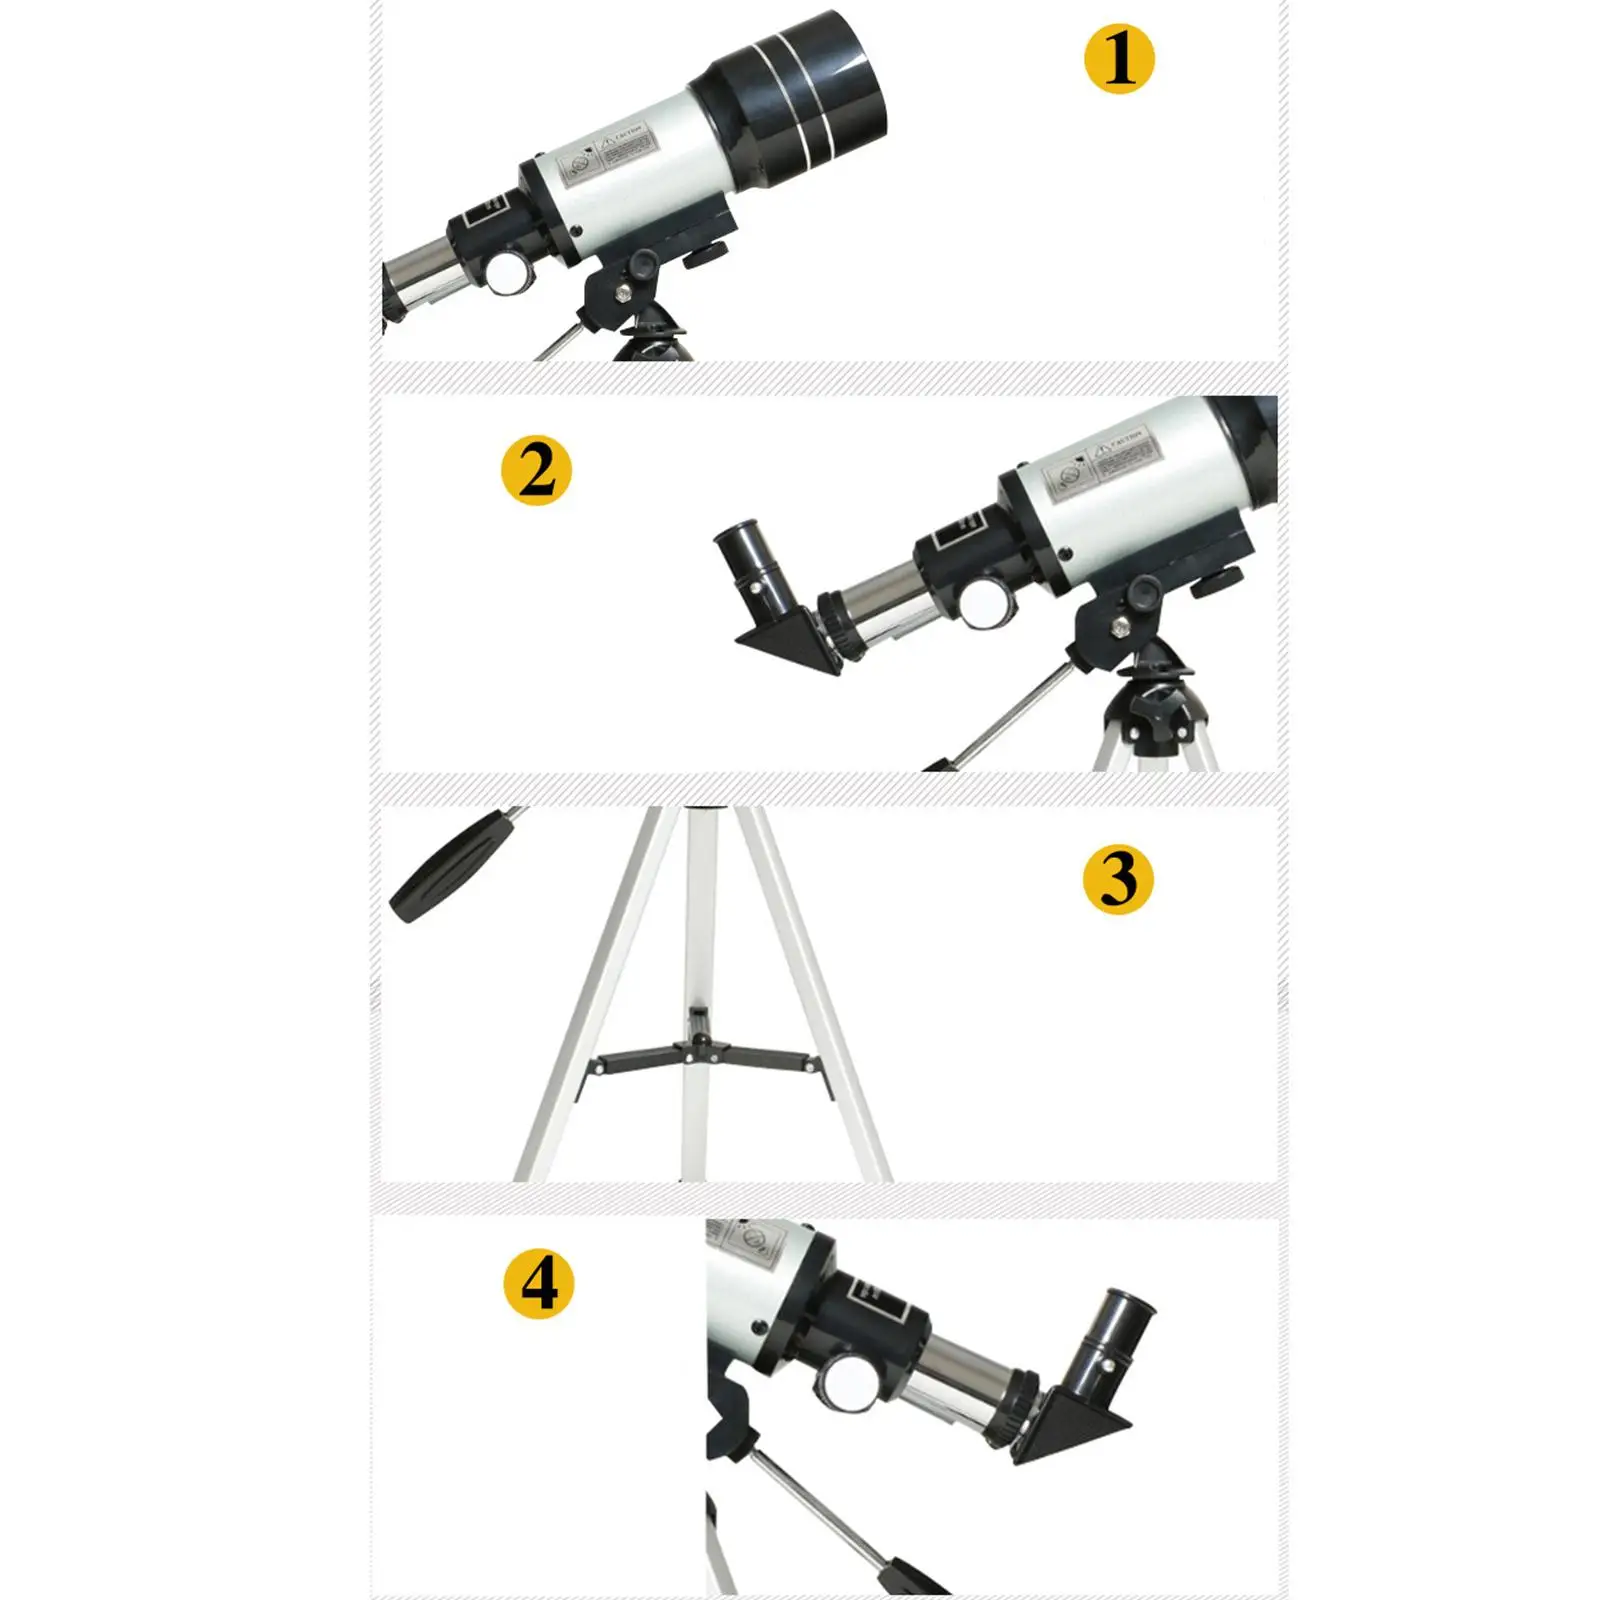 70mm Aperture 300mm Focal Telescope with Tripod for Beginners ,to Watch Wildlife and Landscapes During The Day Accessory Durable